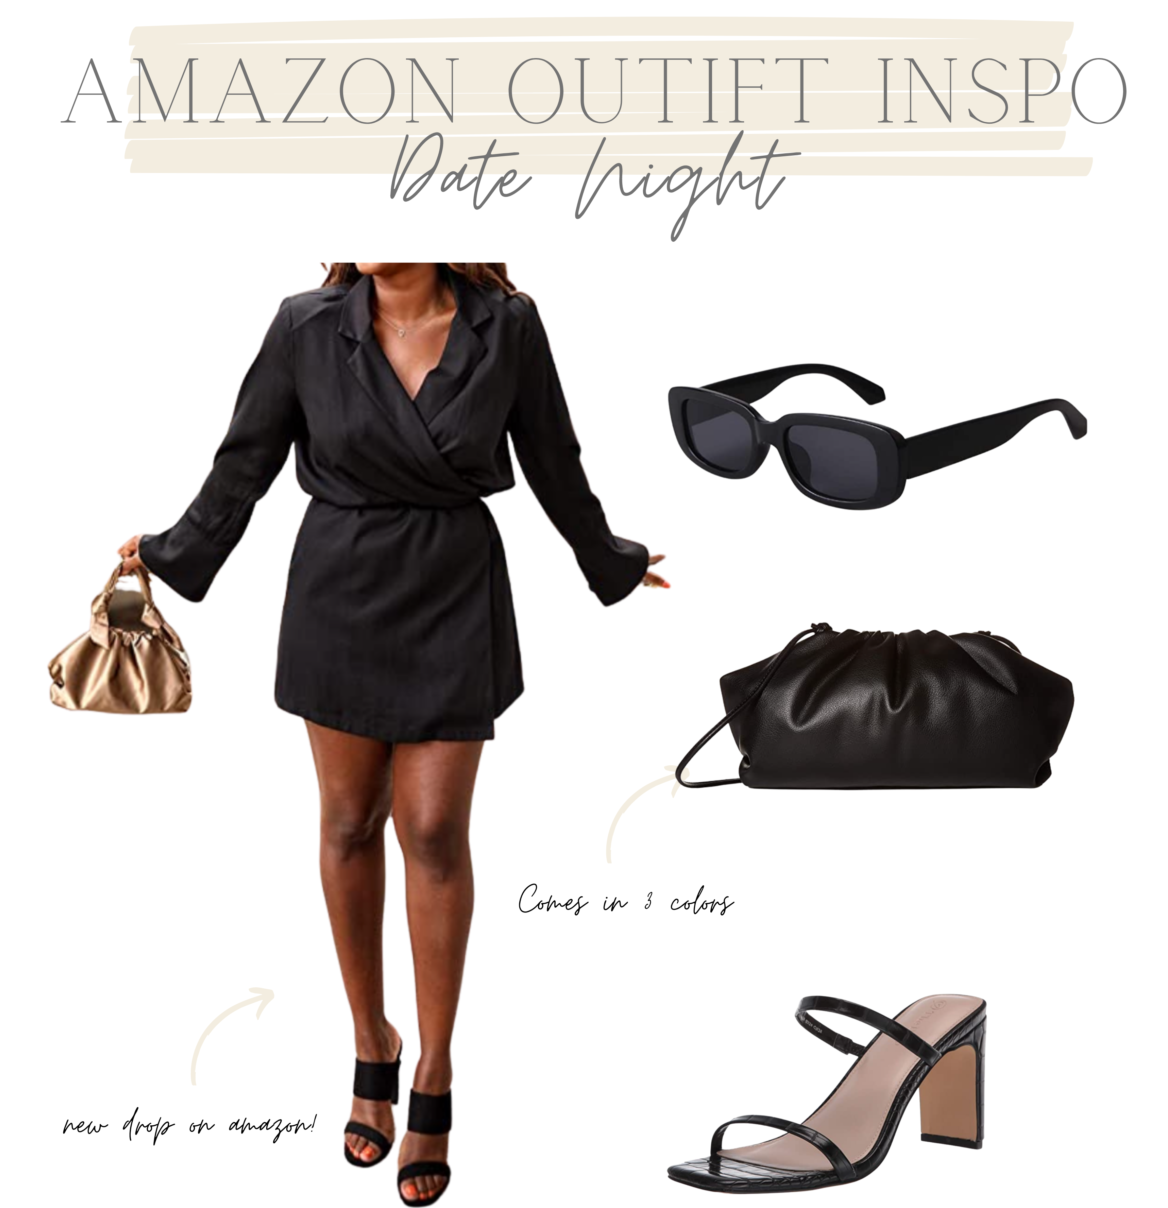 amazon dress, amazon summer dress, amazon clutch, clutch, best-selling clutch, date night outfit, outfit inspo, amazon outfit 